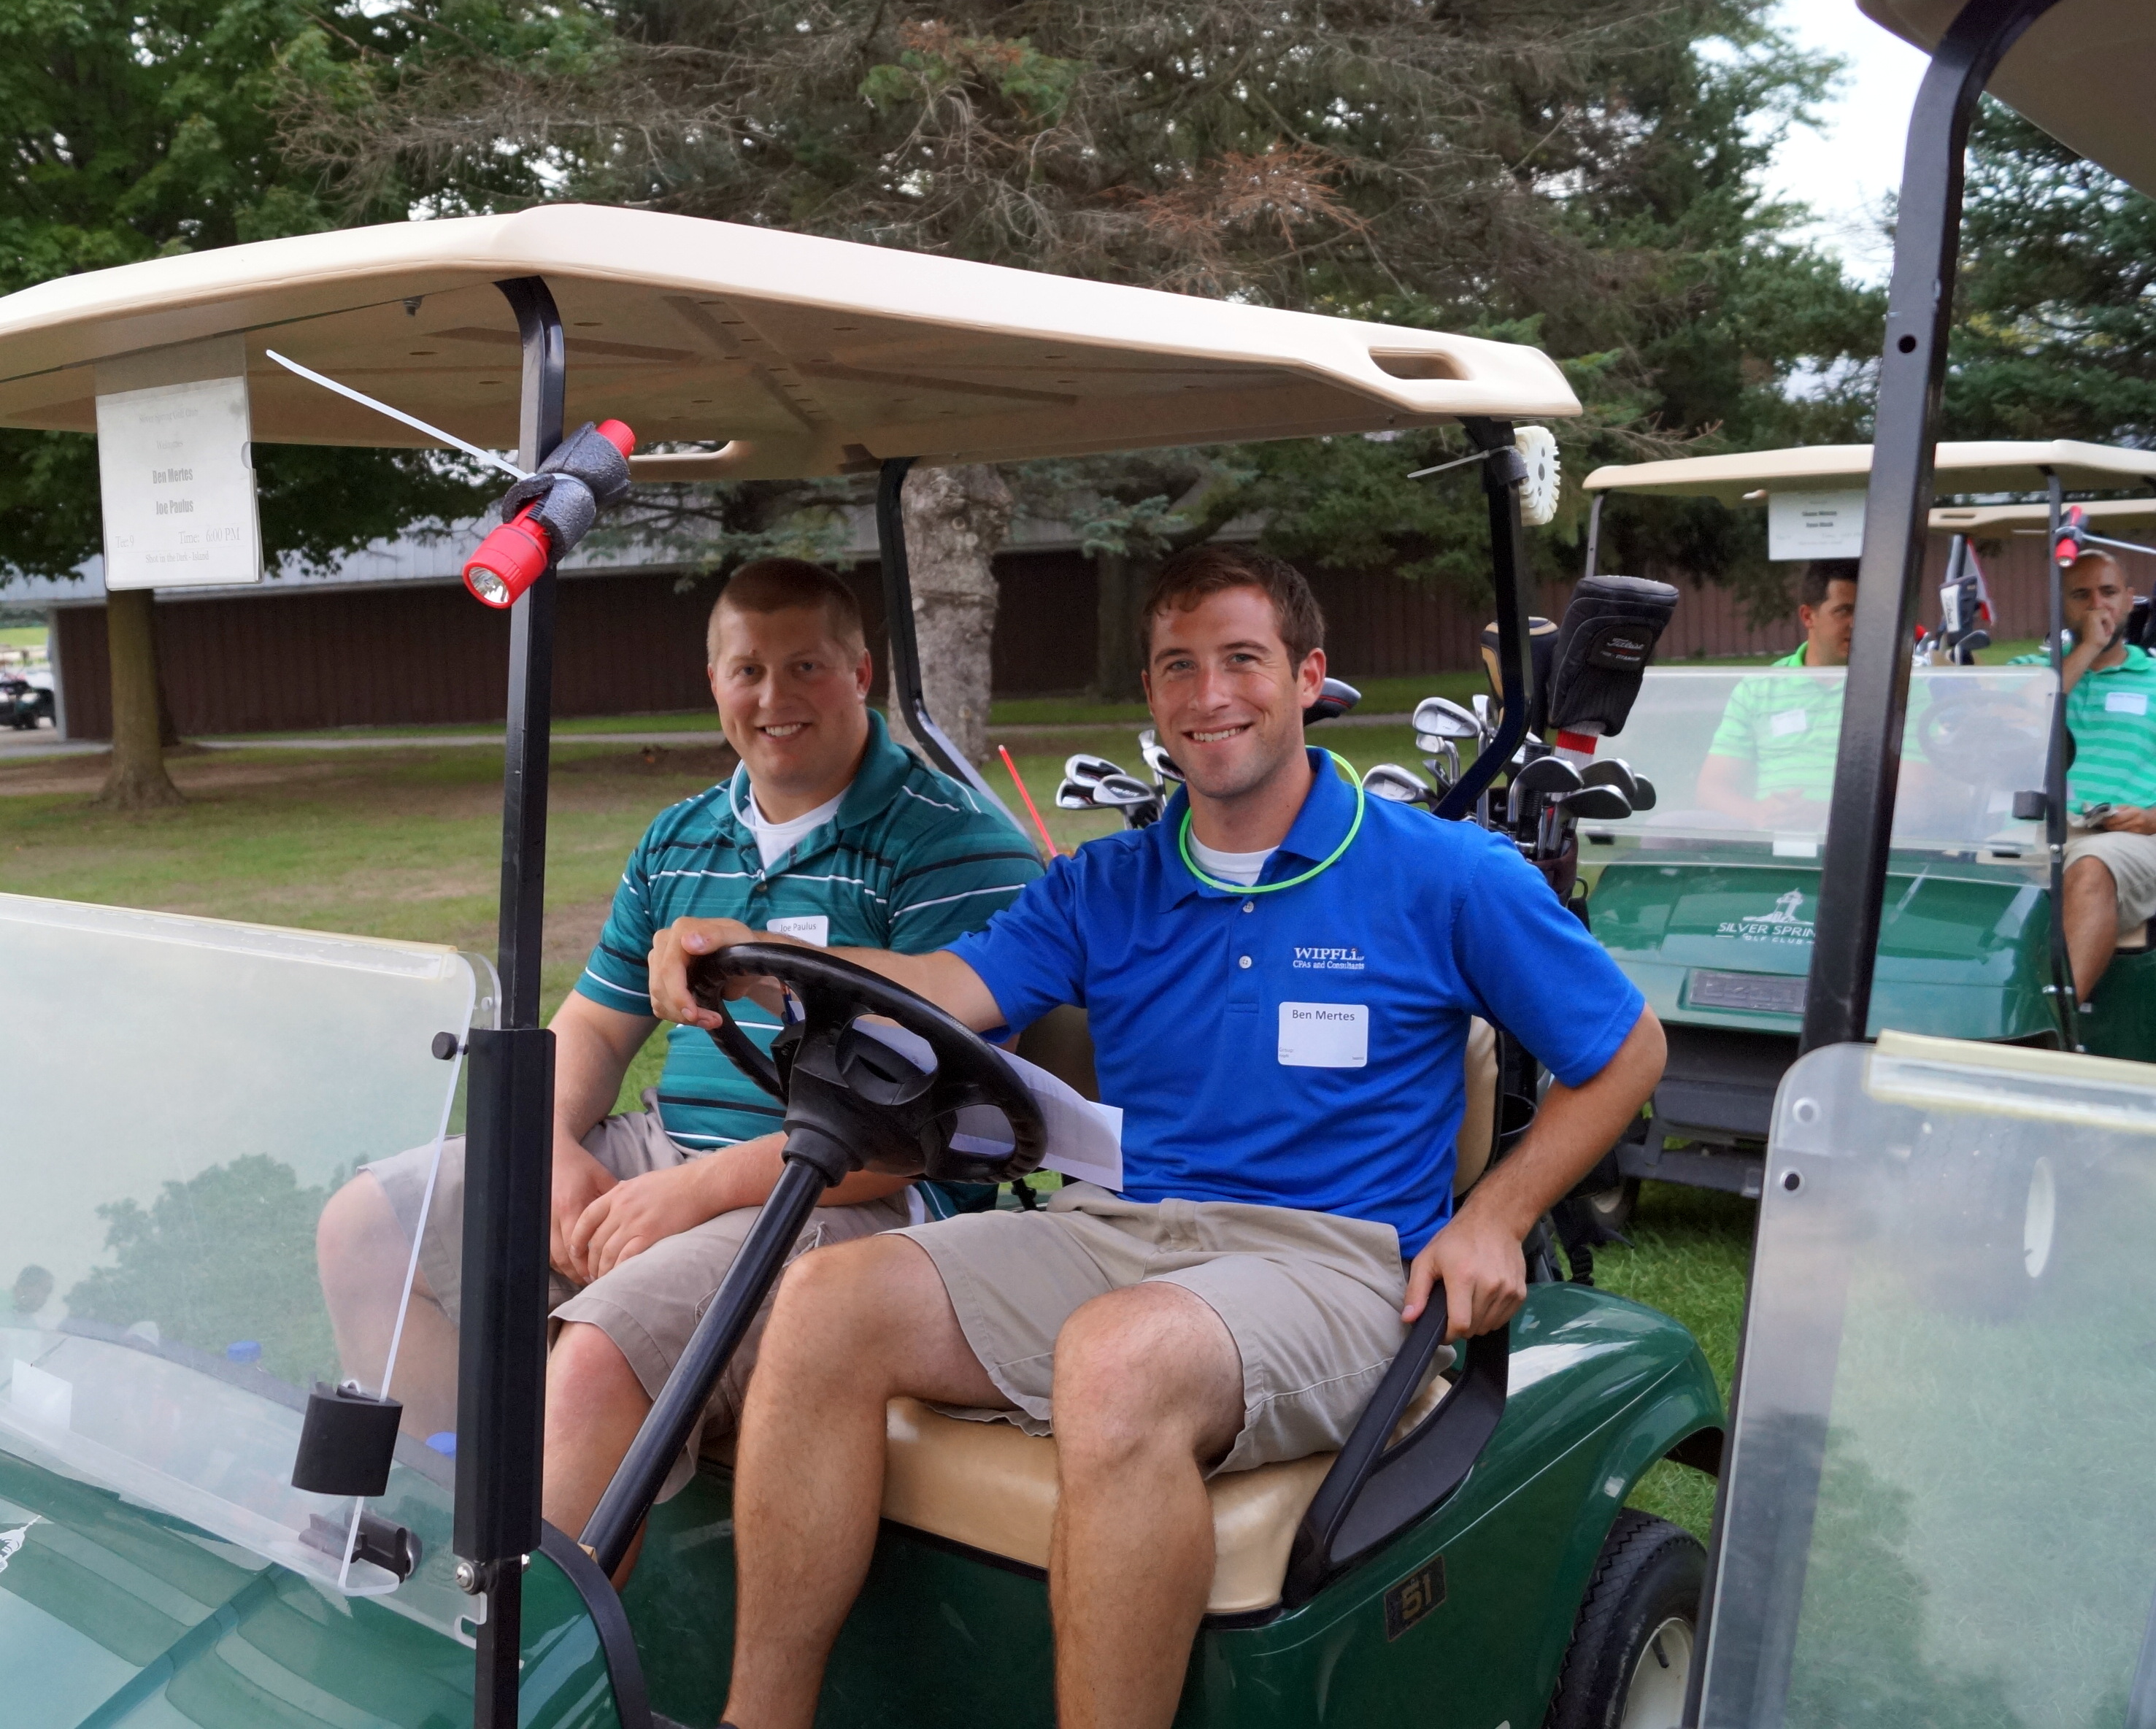 Two young men are very happily sitting in a golf cart.